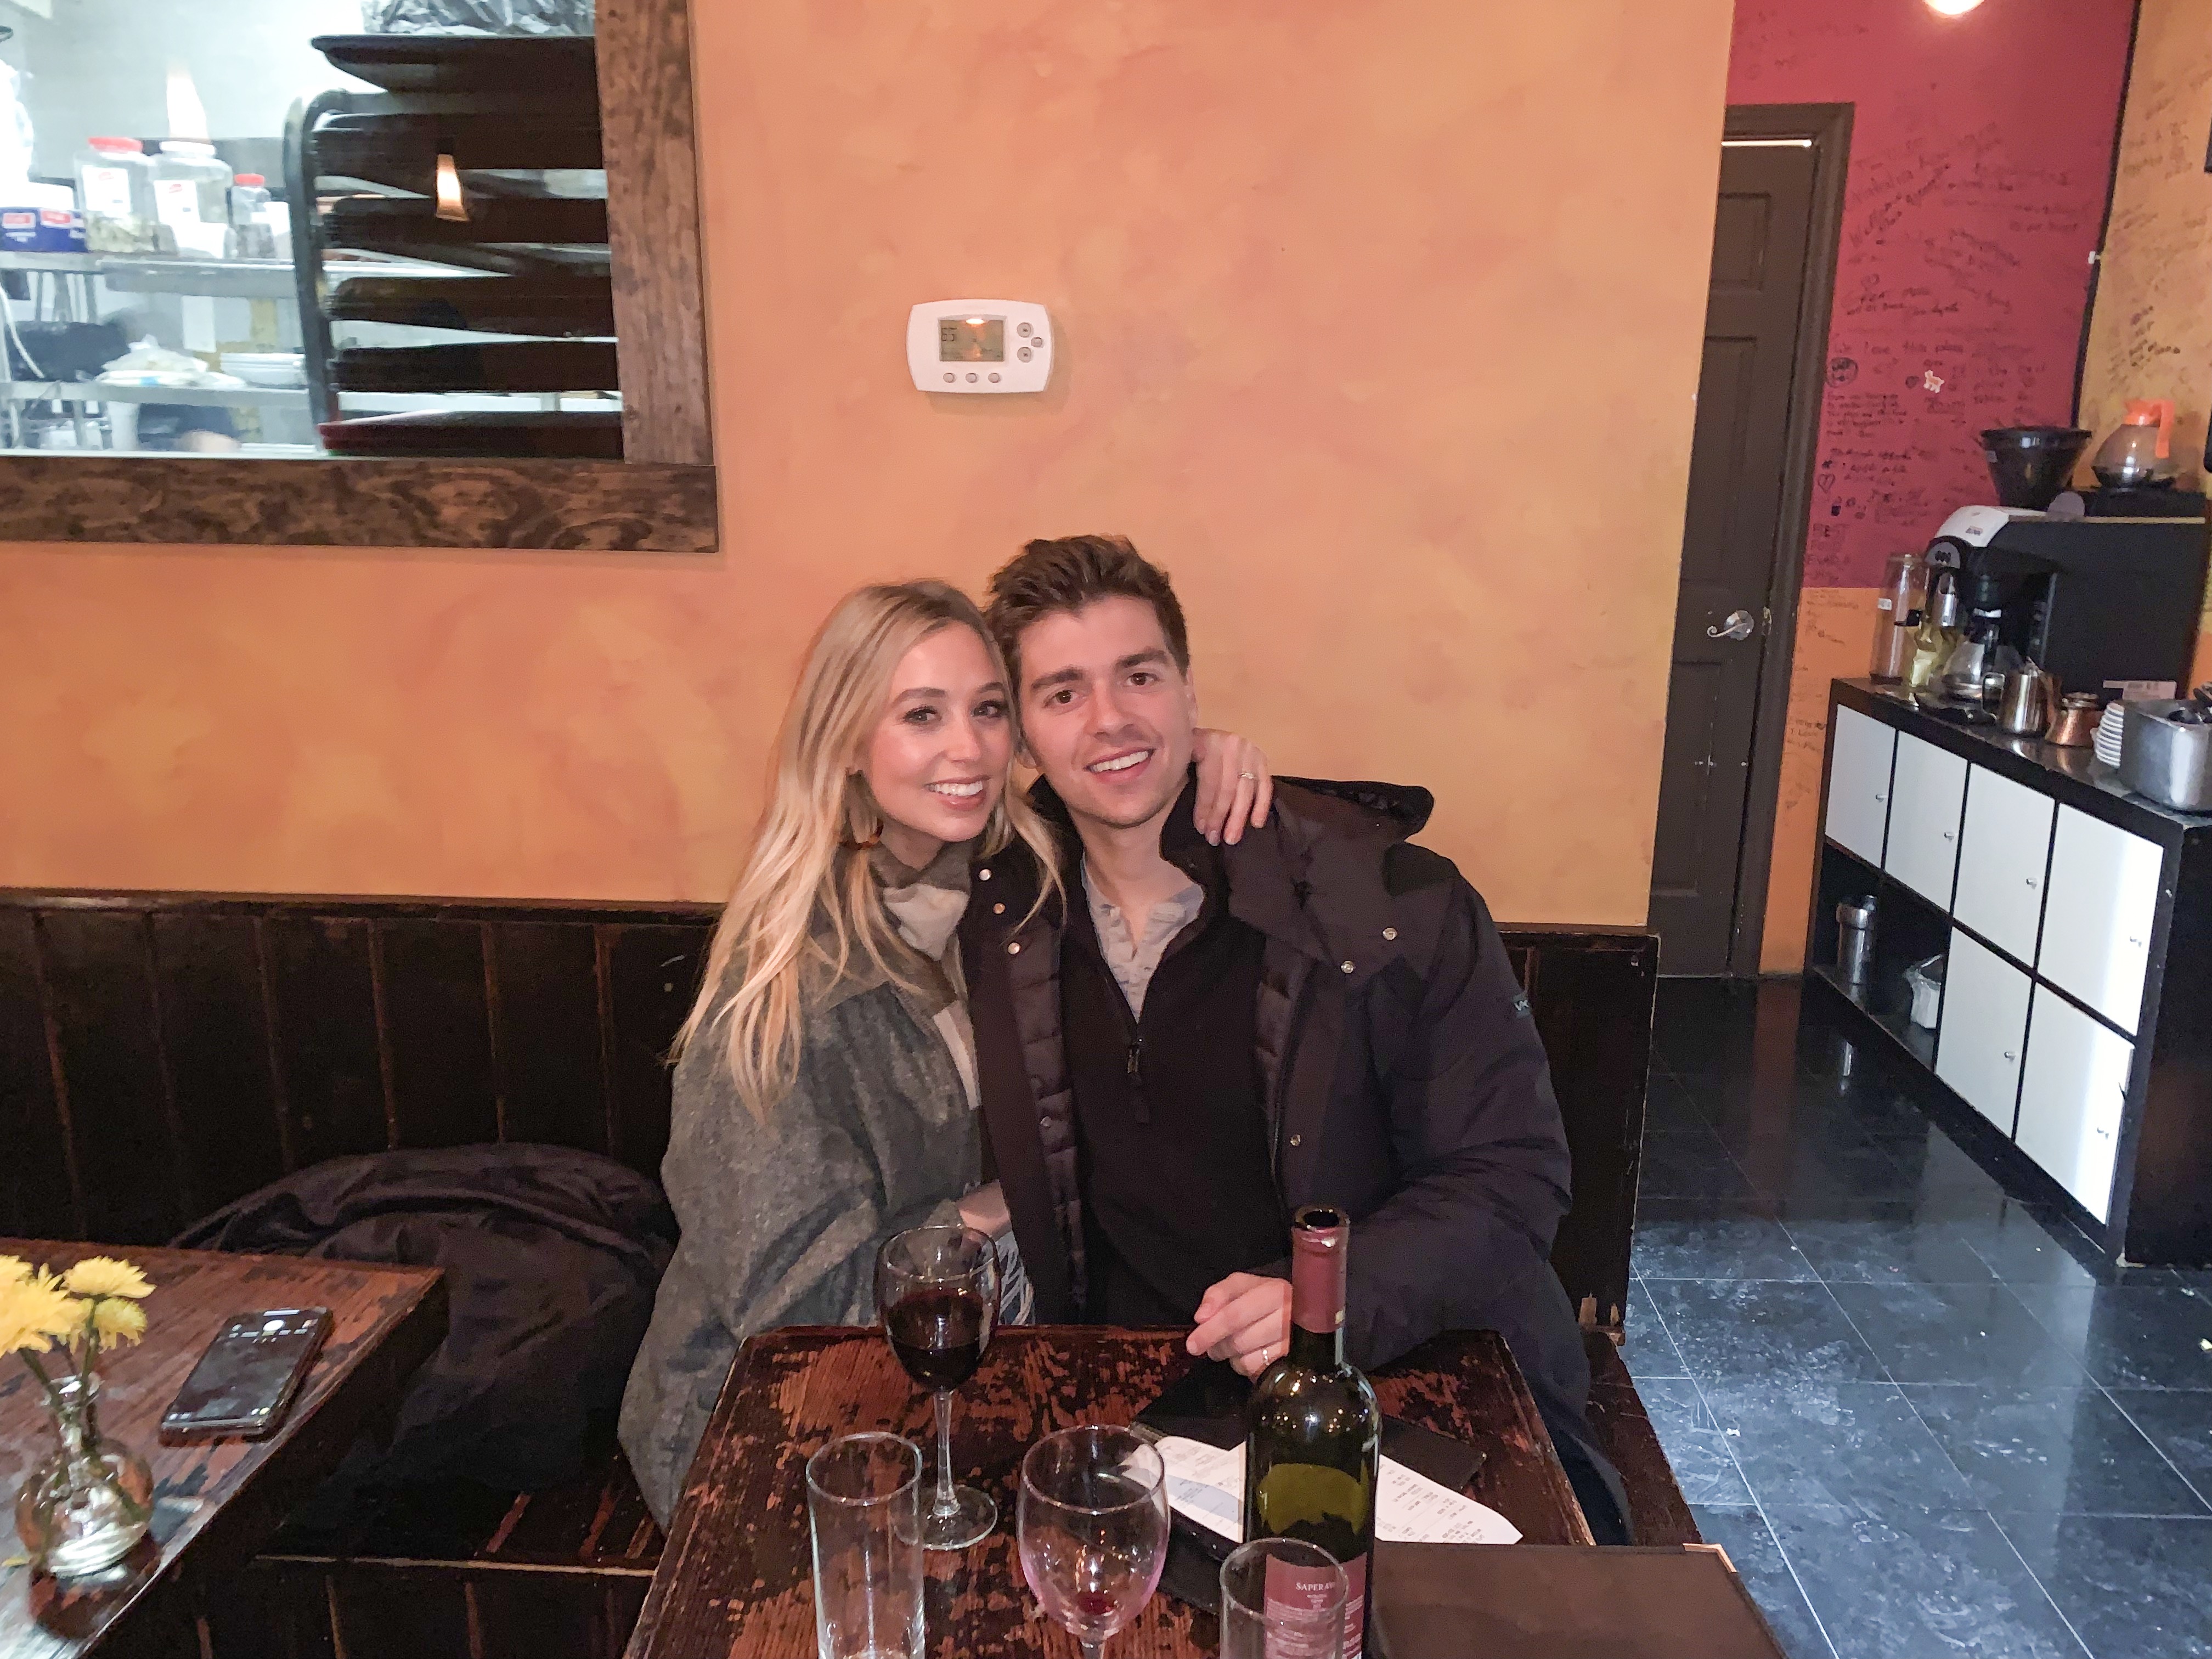 skyler bouchard and sebastian oppenheim smiling on a date in nyc east village